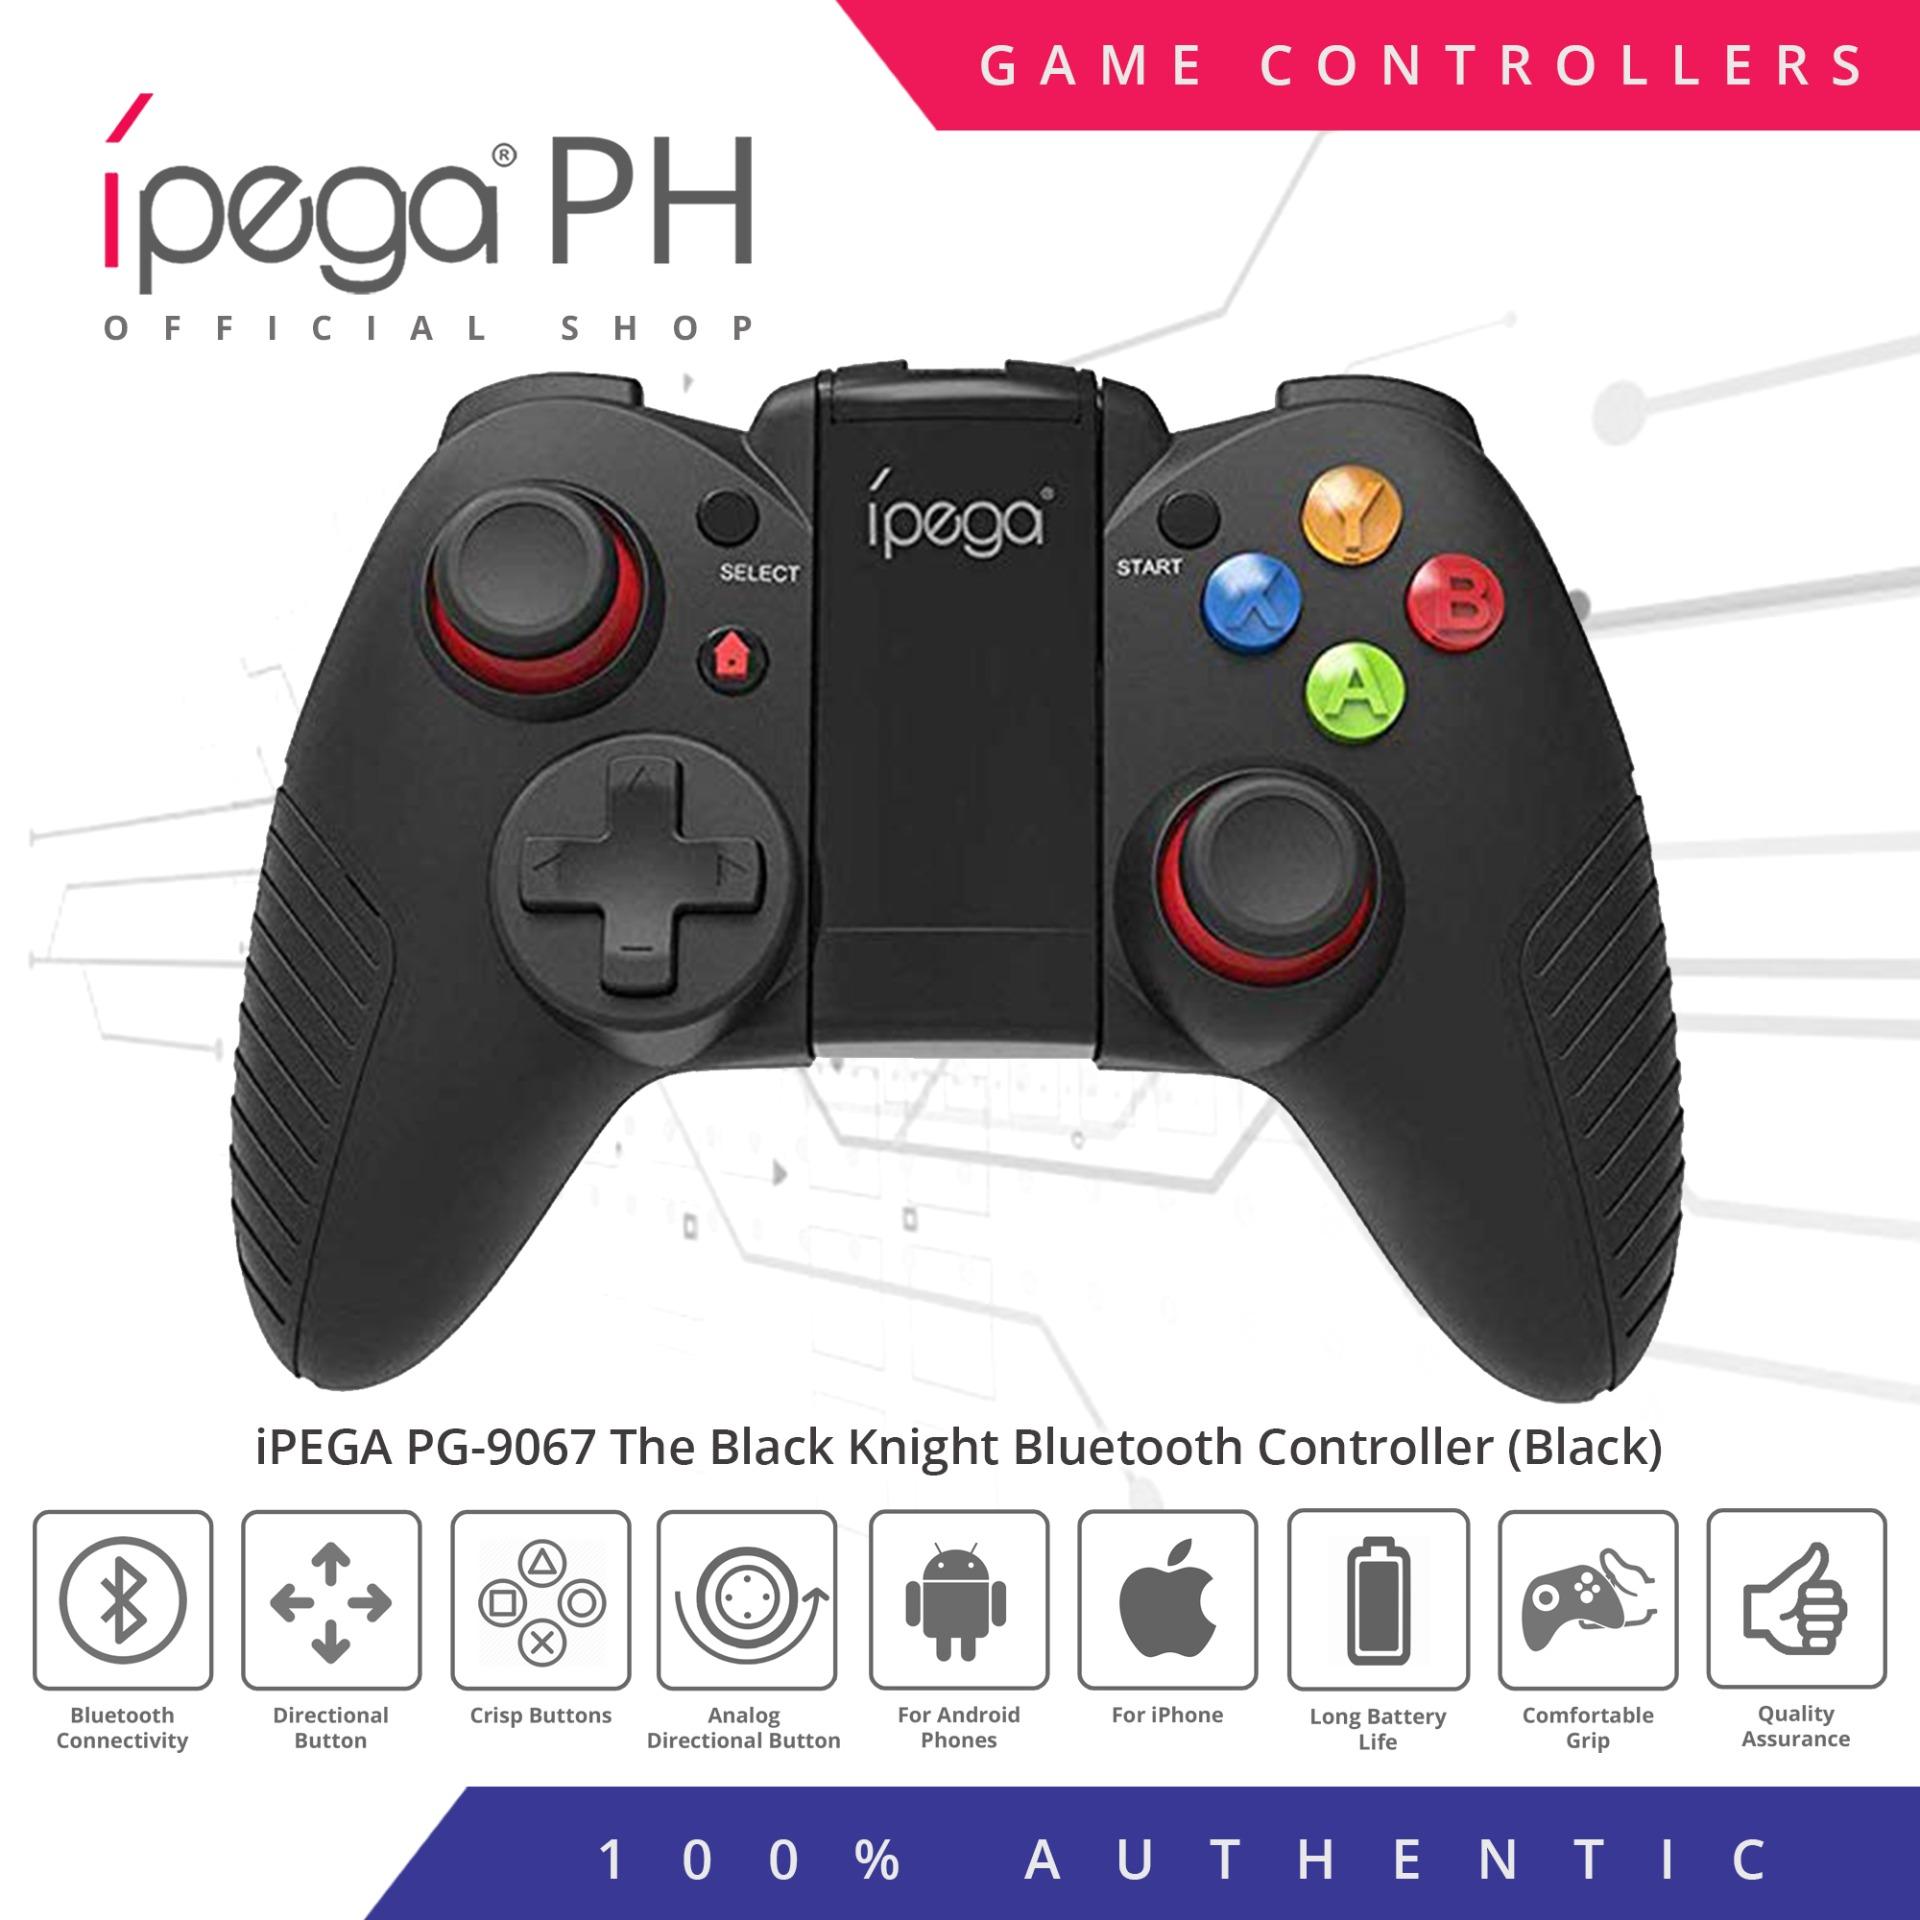 Buy Latest Console Gaming at Best Price Online | lazada.com.ph - 